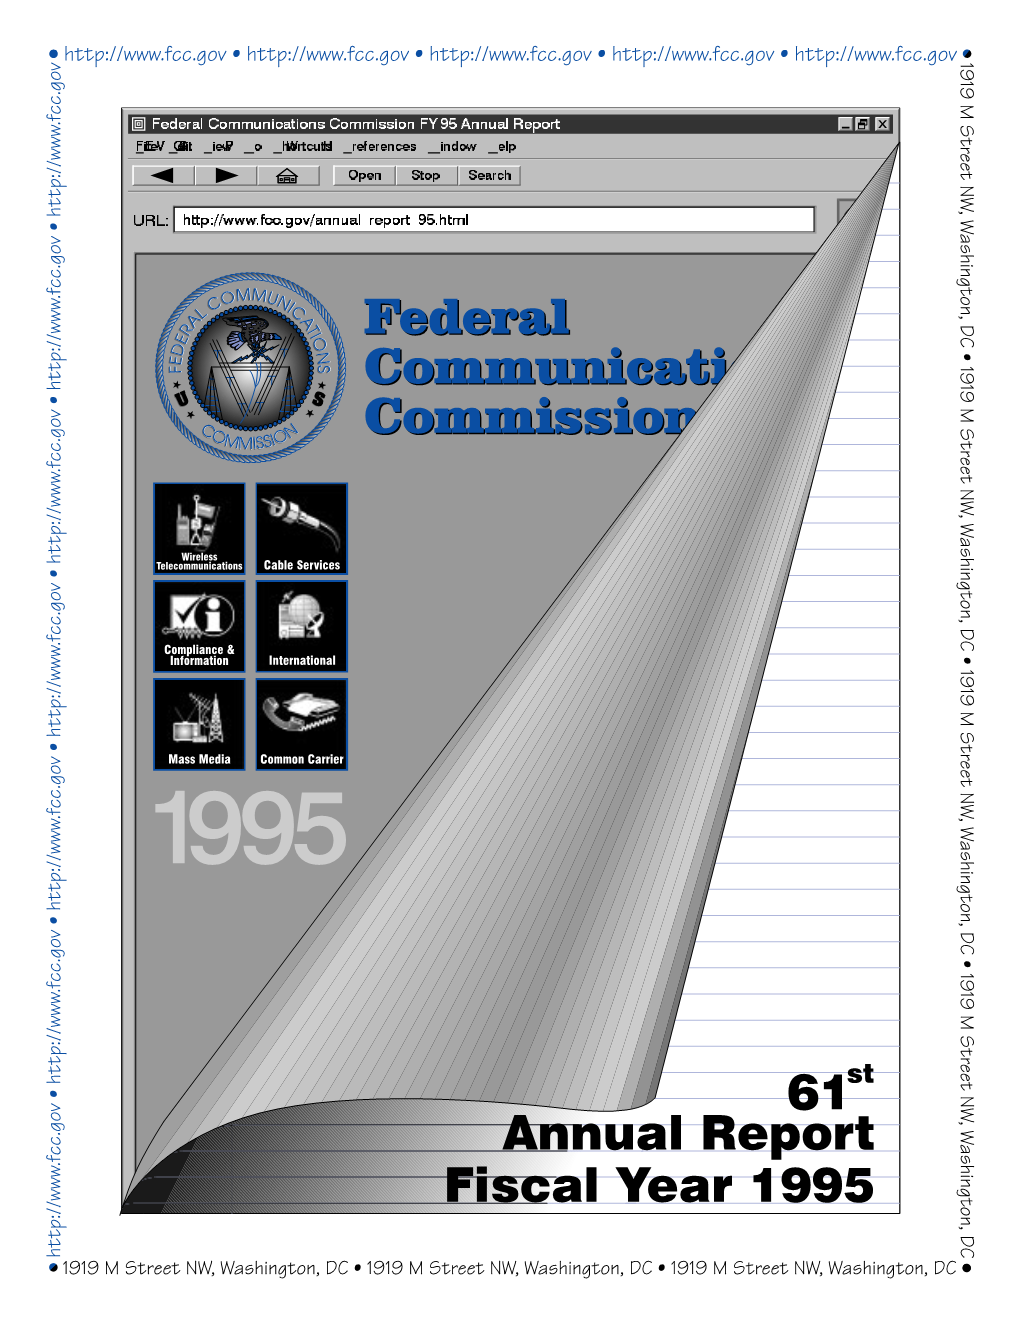 FCC Annual Report, Fiscal Year 1995